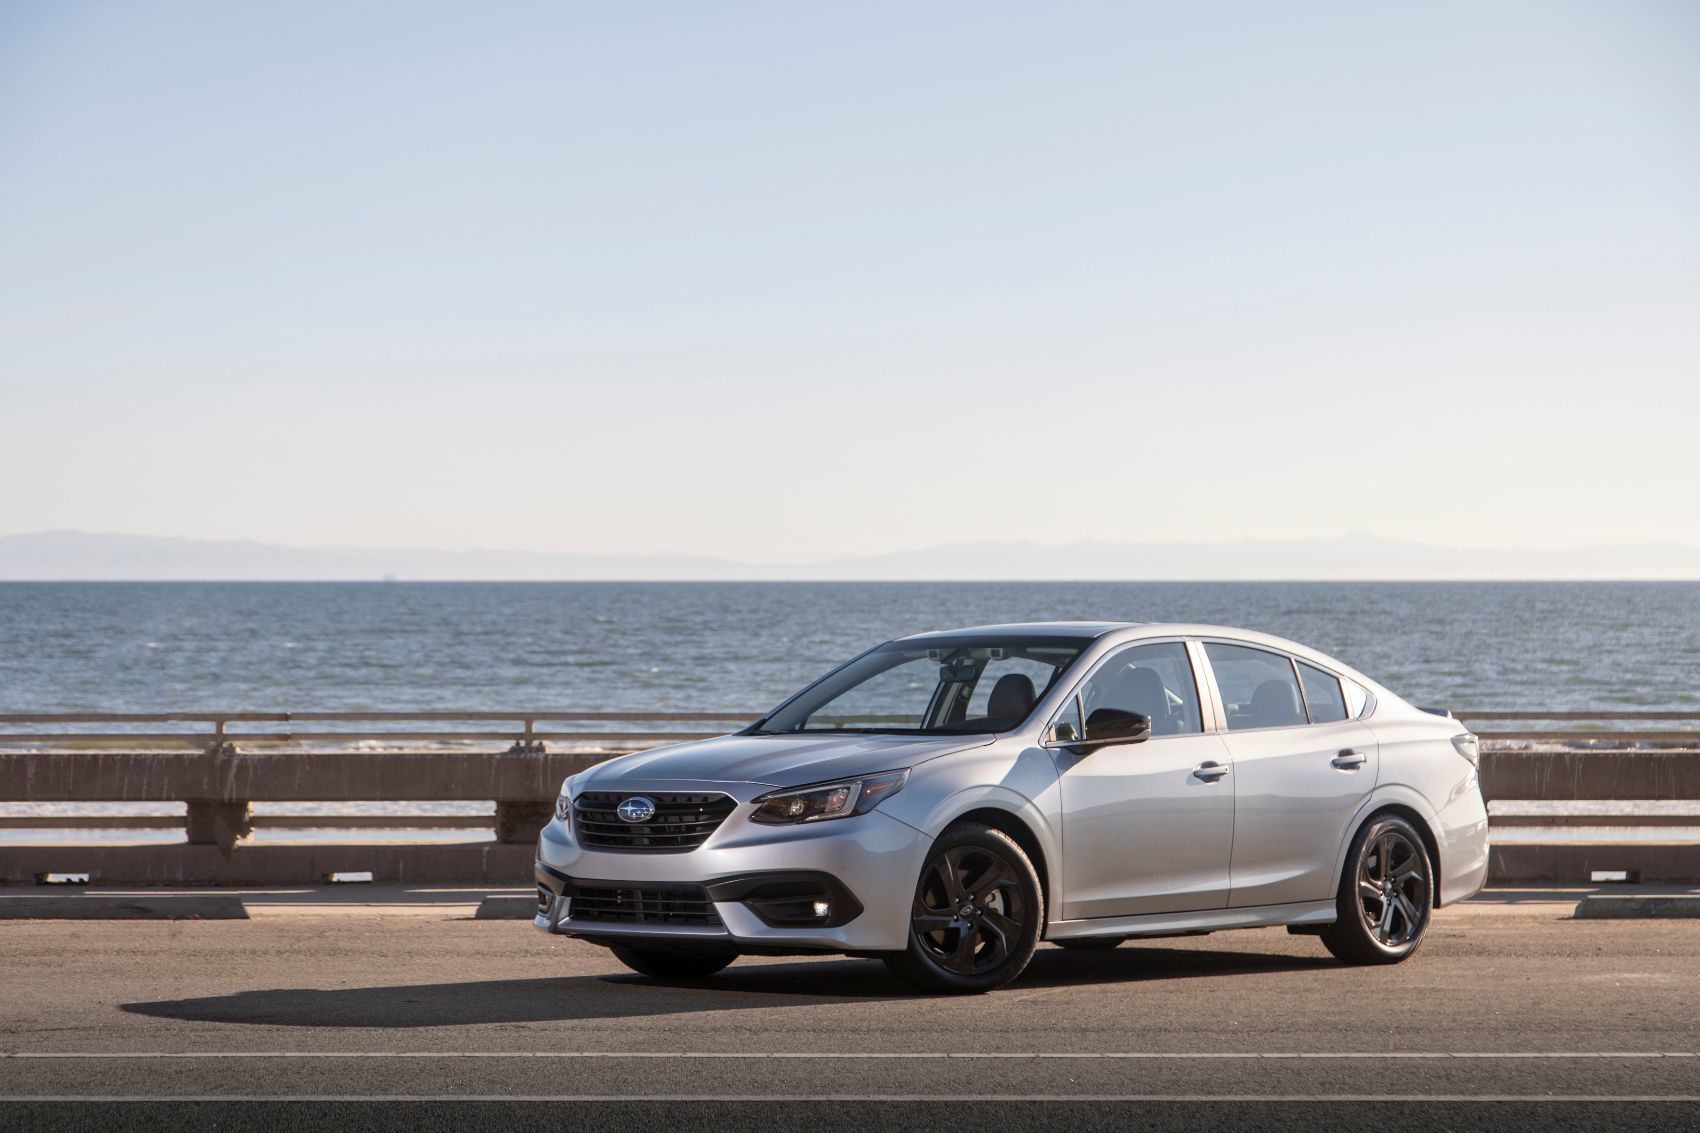 2021 Subaru Legacy: Trim Levels, Pricing Info & Other Fast Facts